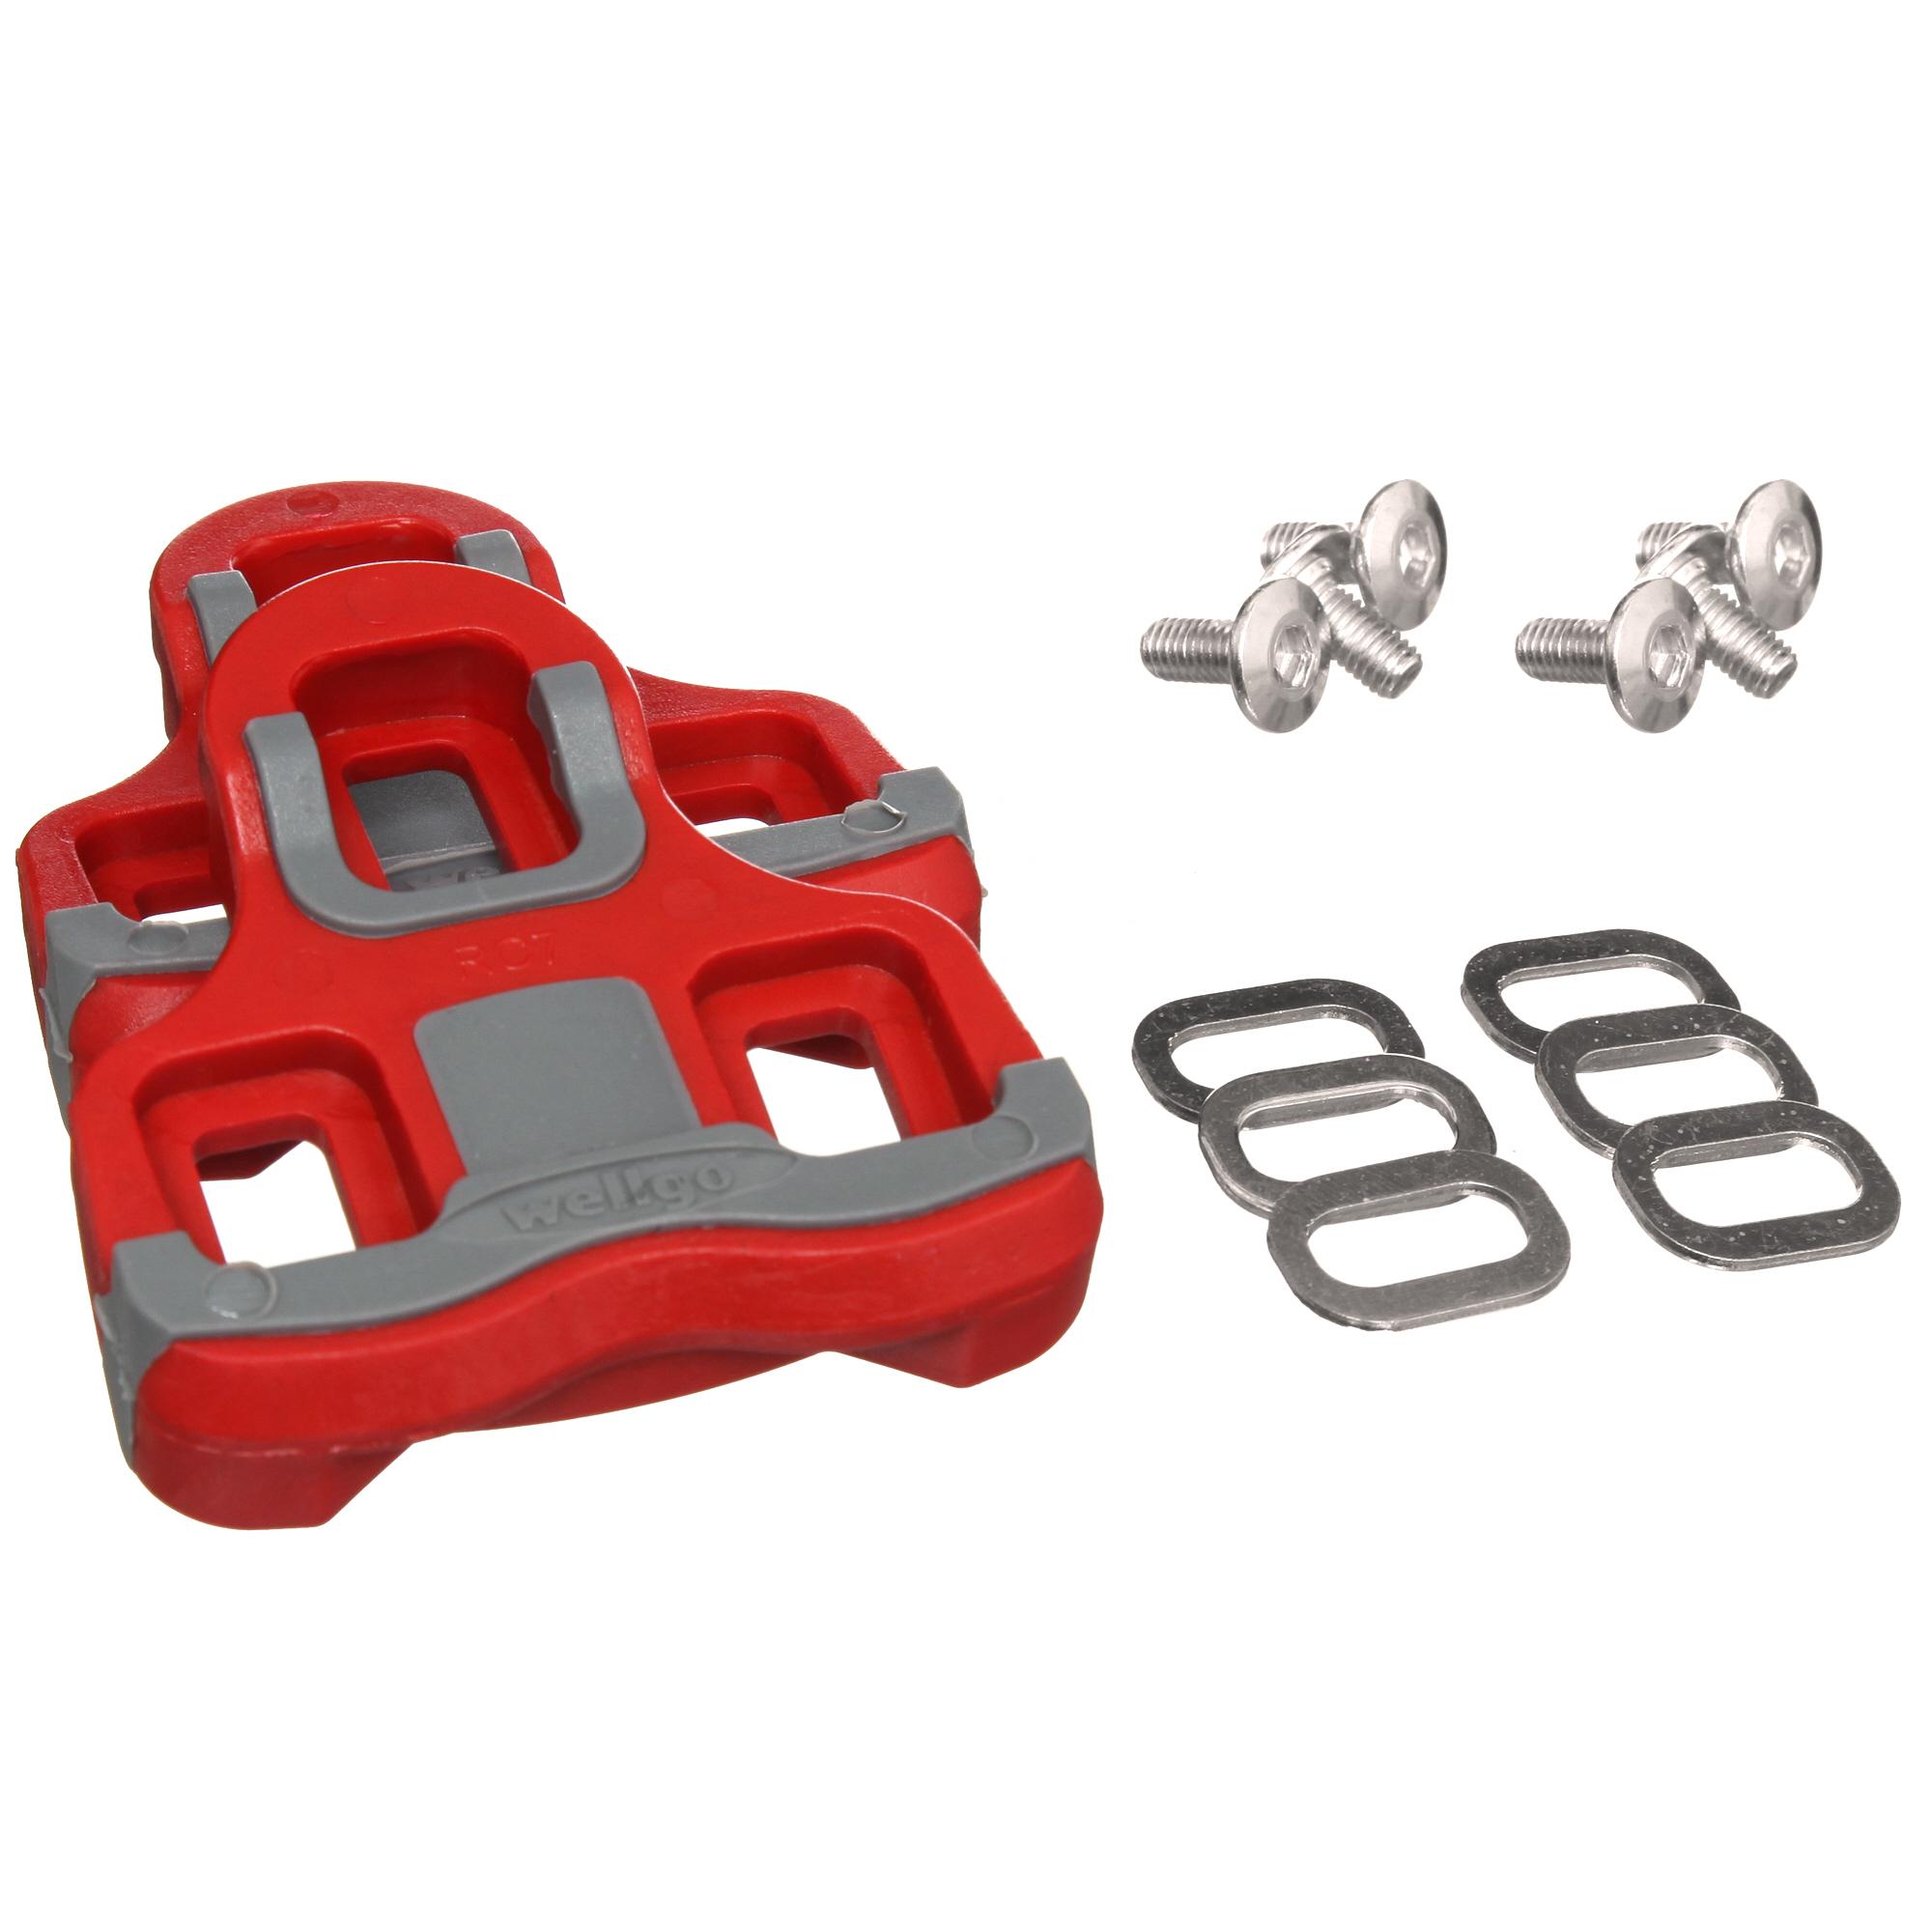 Lifeline Road Pedal Cleats - Look Keo Compatible - Red